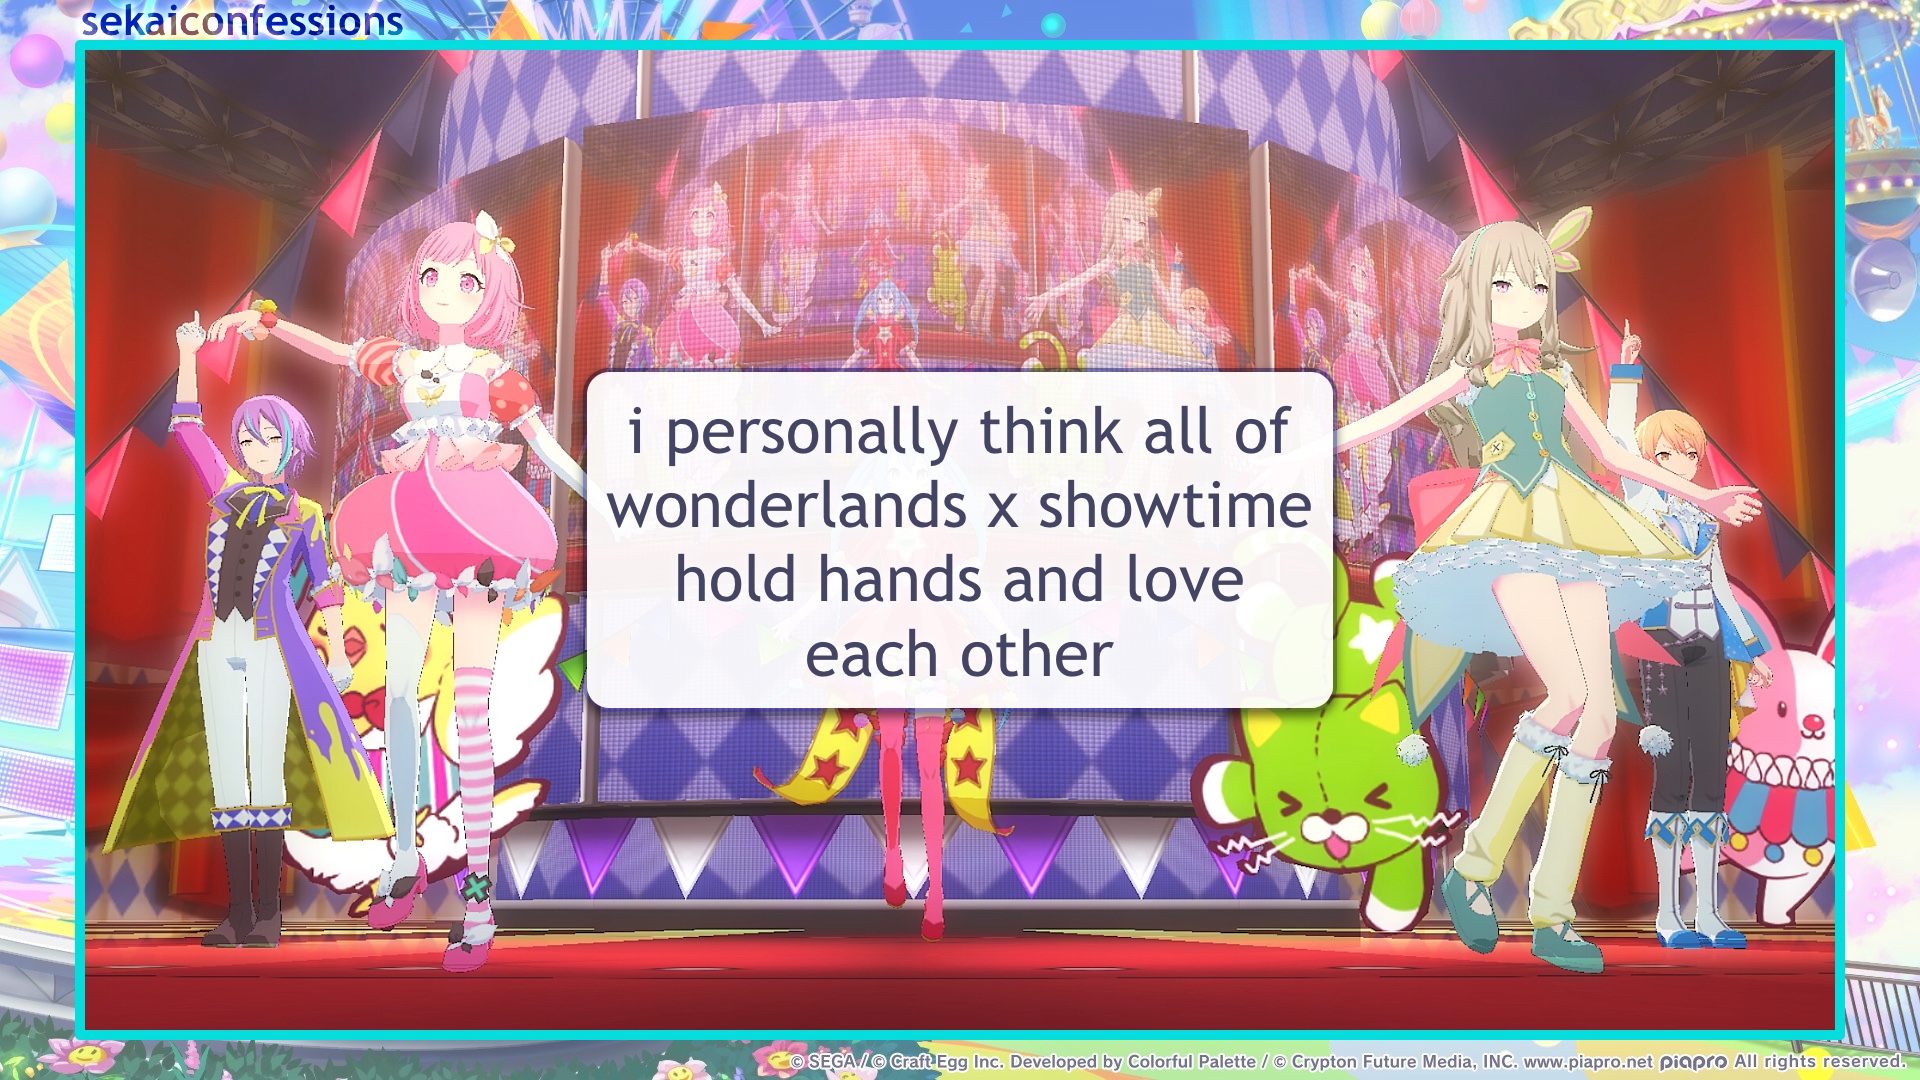 HATSUNE MIKU COLORFUL STAGE on Twitter Check out these wonderful  illustrations featuring Wonderlands x Showtime   httpstcomX8xoozr3I  Twitter